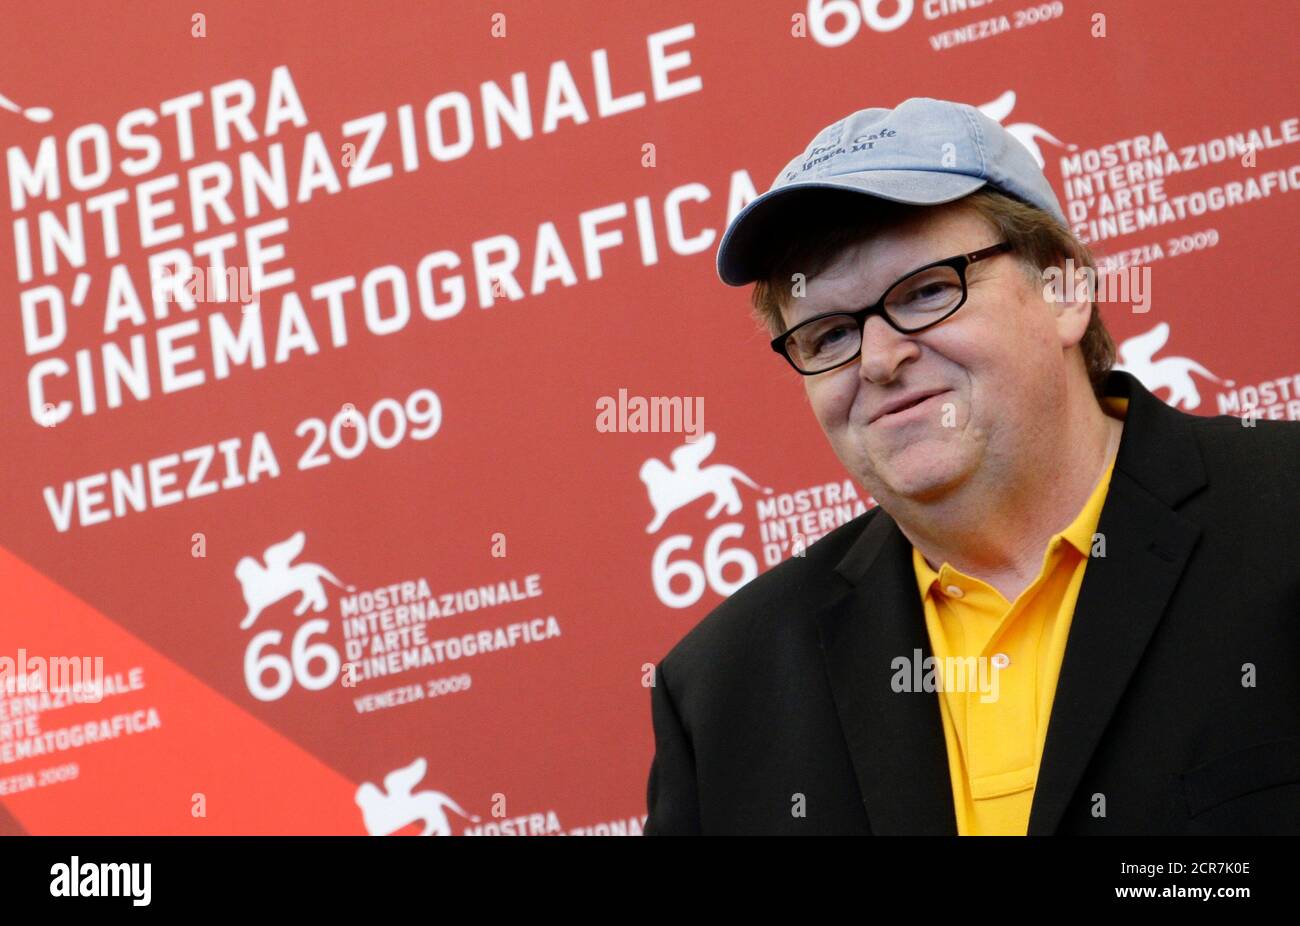 U.S. director Michael Moore poses during a photocall at the 66th Venice Film Festival September 6, 2009. Capitalism is evil. That is the conclusion U.S. documentary maker Moore comes to in his latest movie 'Capitalism: A Love Story', which premieres at the Venice Film Festival on Sunday. REUTERS/Tony Gentile (ITALY ENTERTAINMENT) Stock Photo